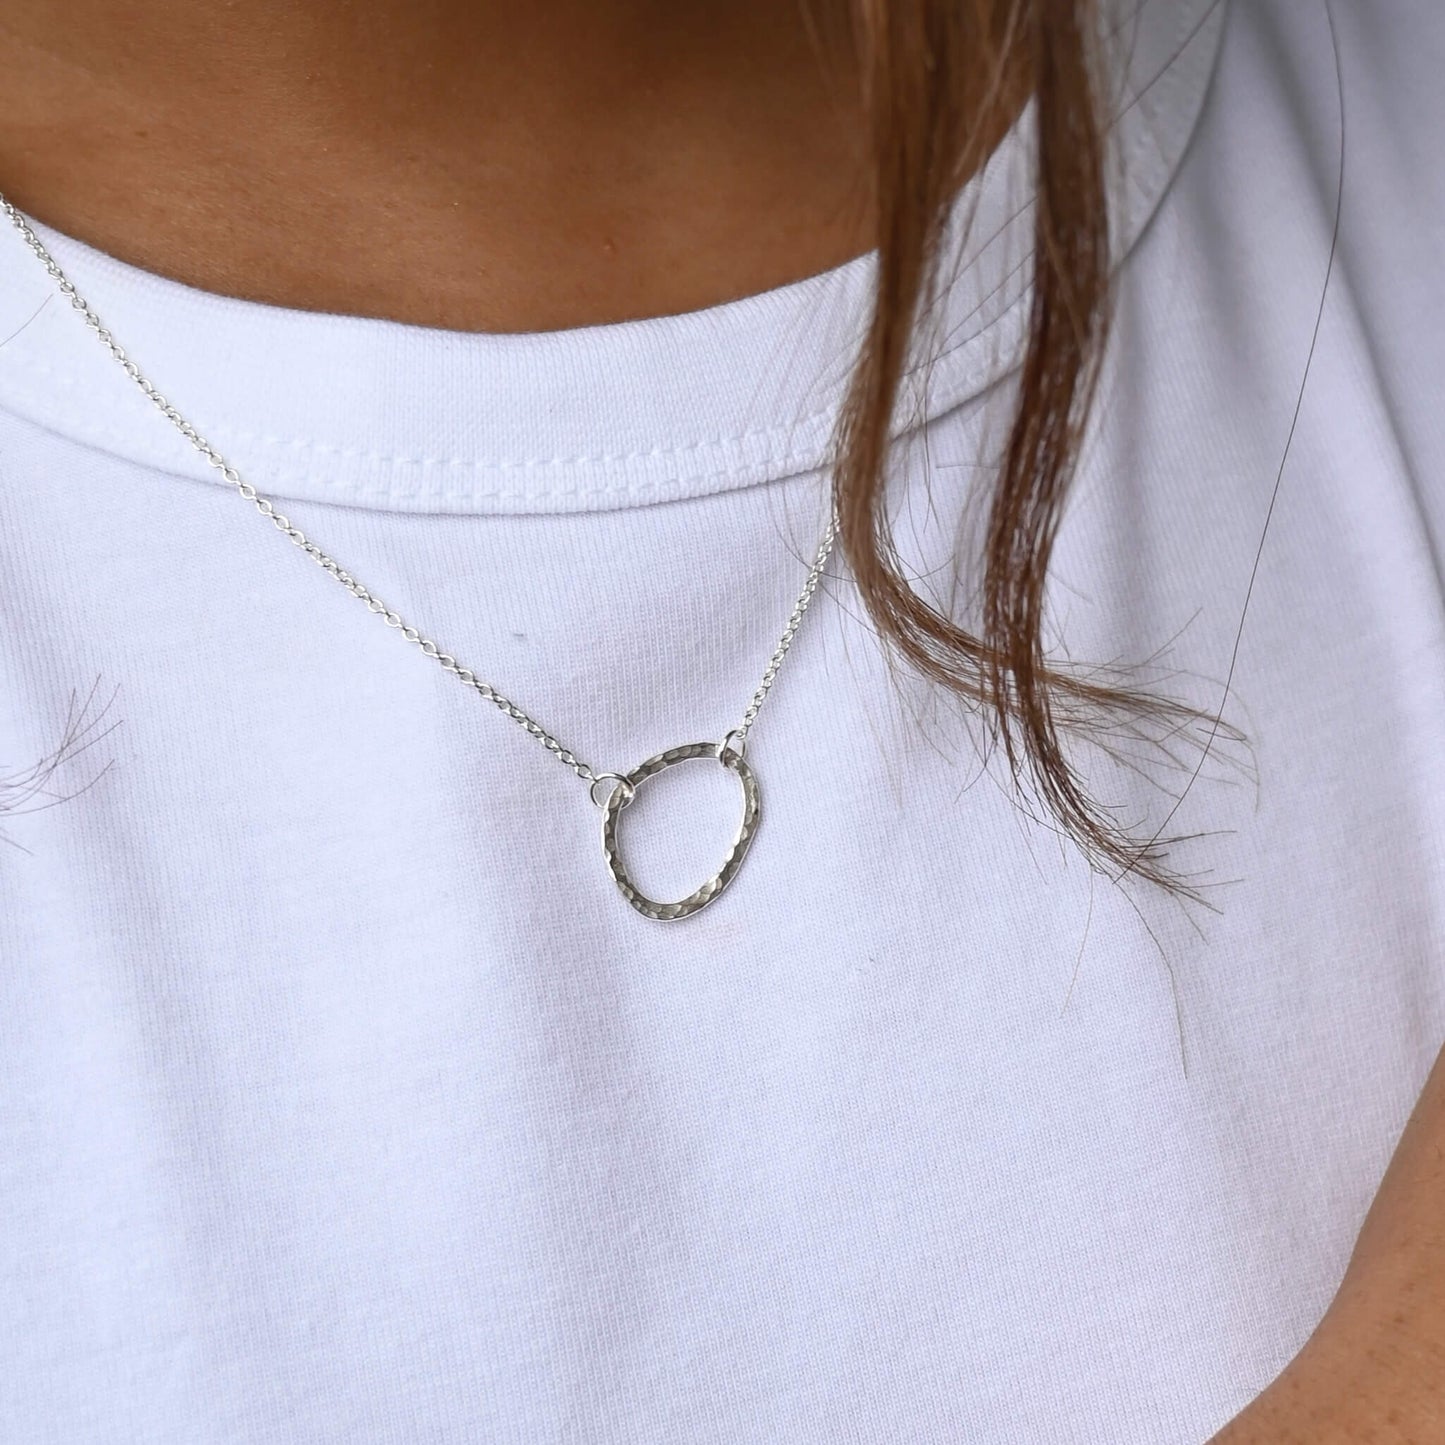 Silver Oval Pendant Necklace - Drumgreenagh Design Store